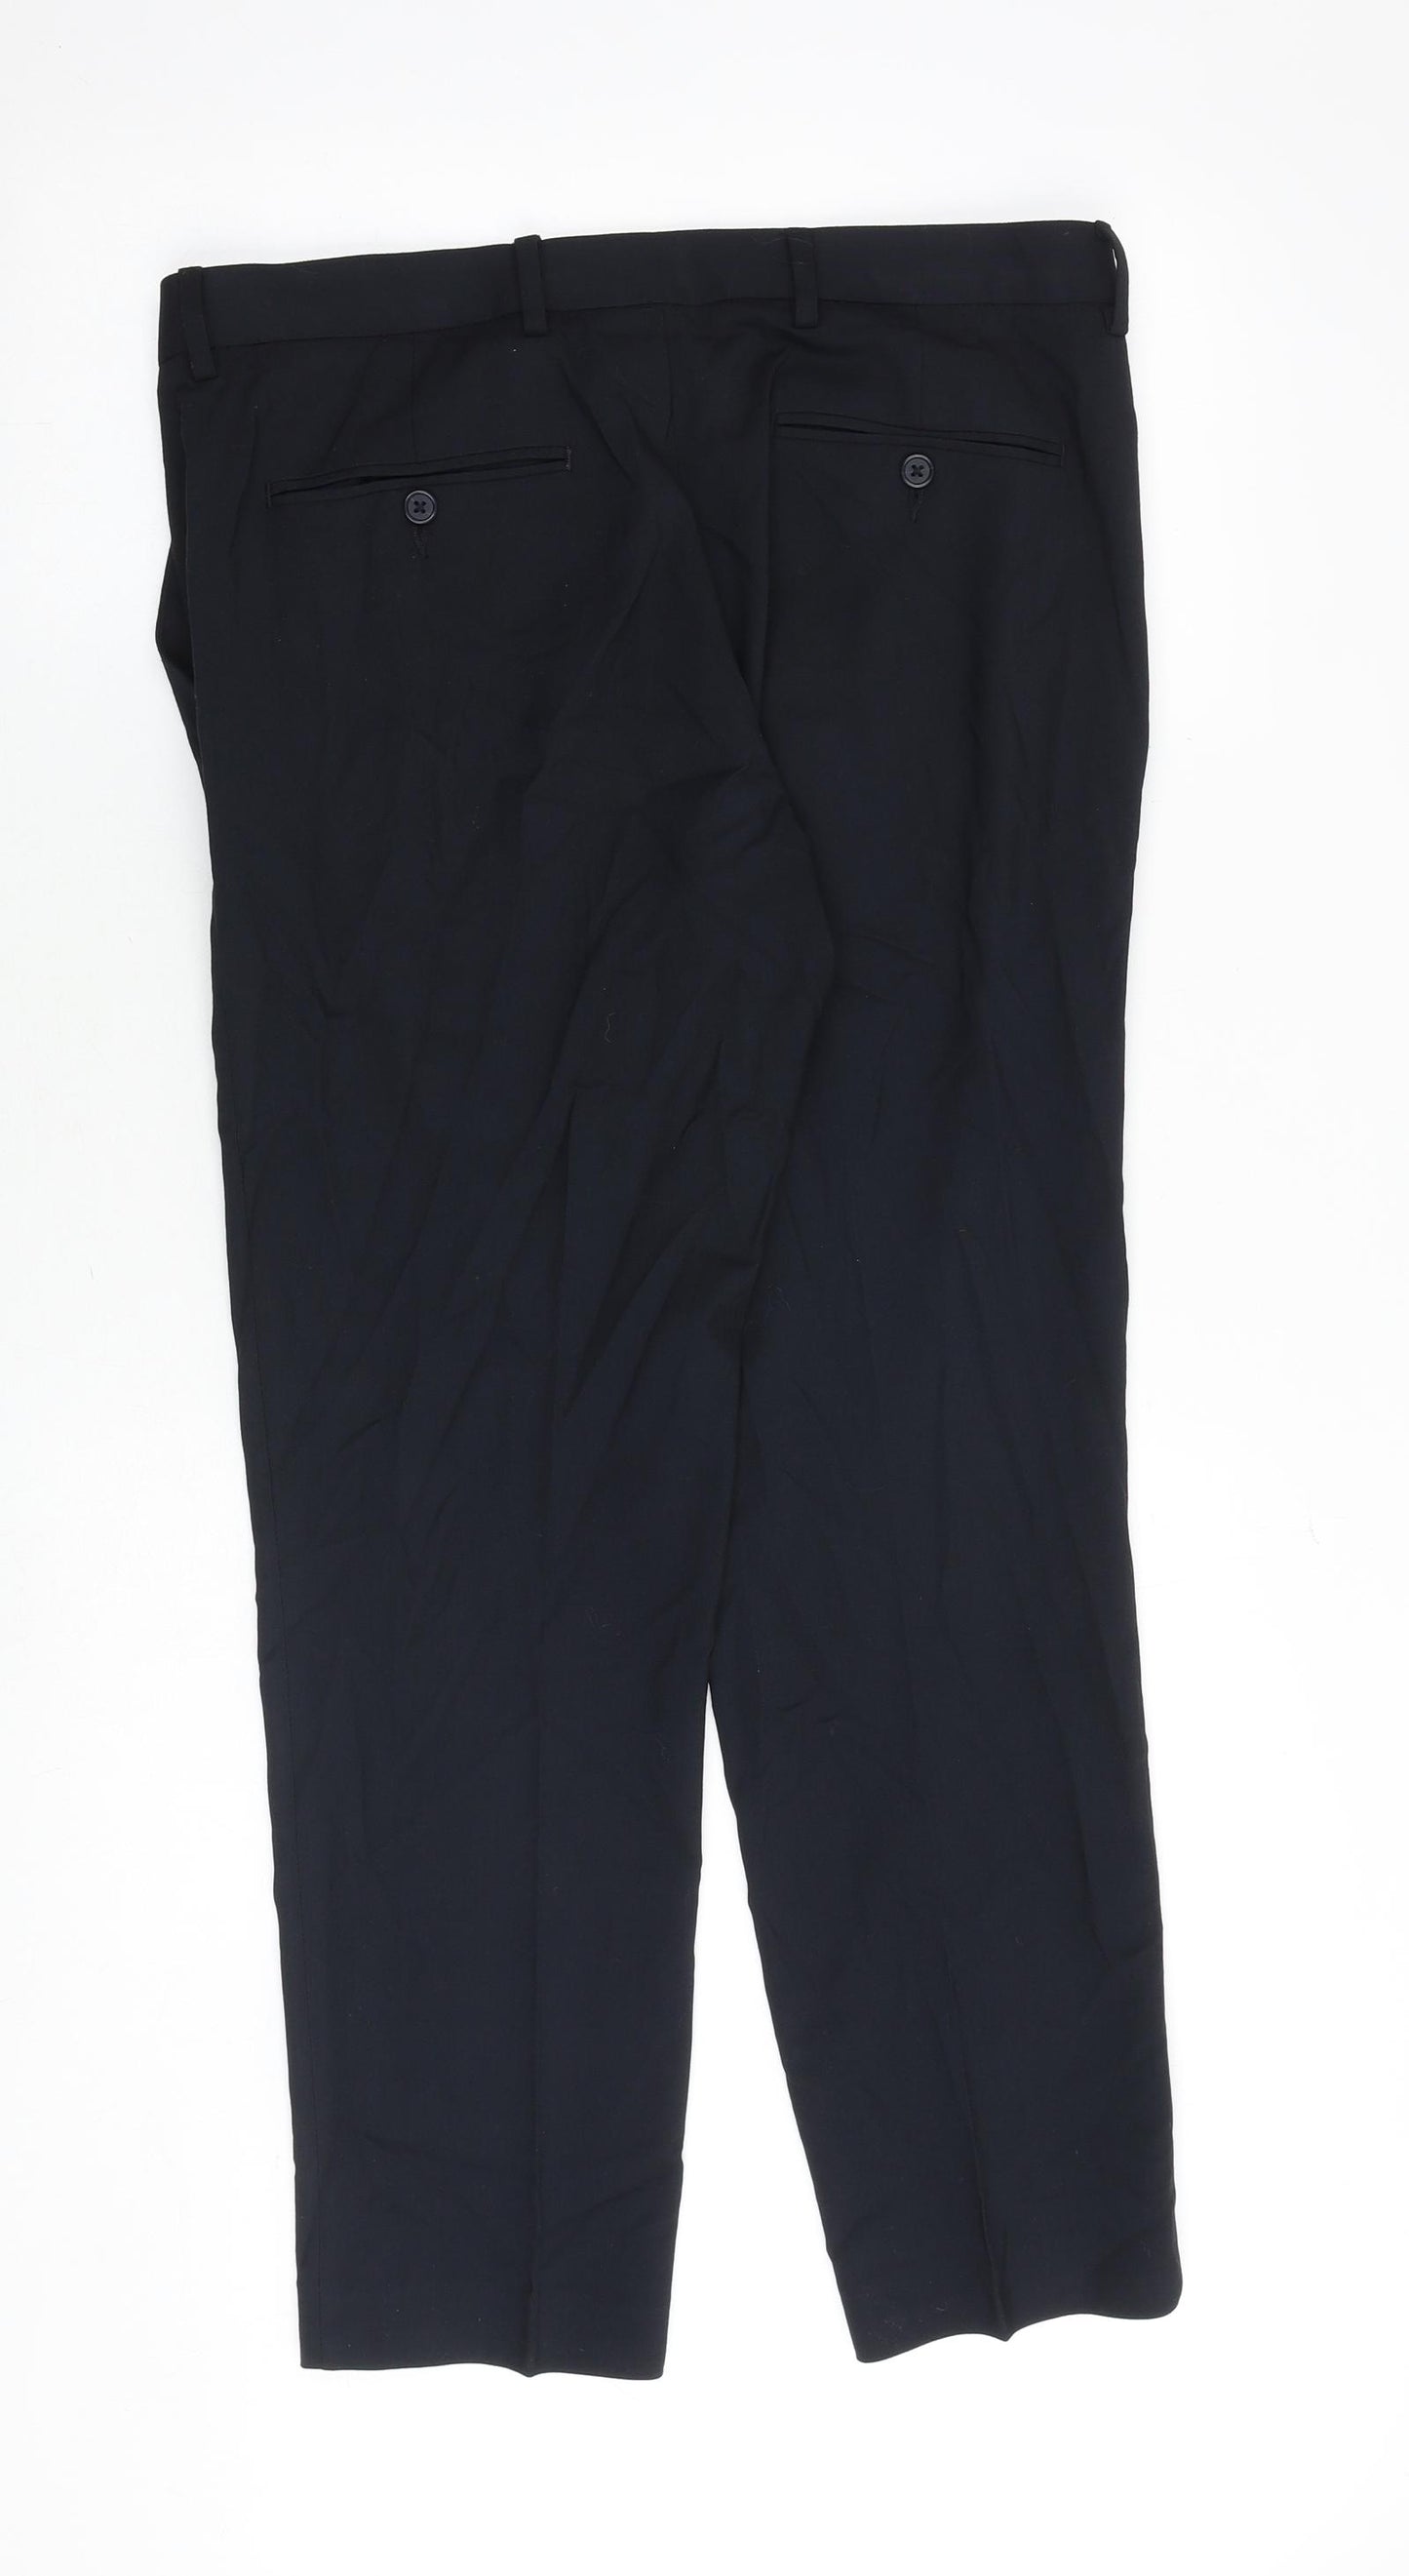 Marks and Spencer Mens Black Polyester Dress Pants Trousers Size 34 in Regular Zip